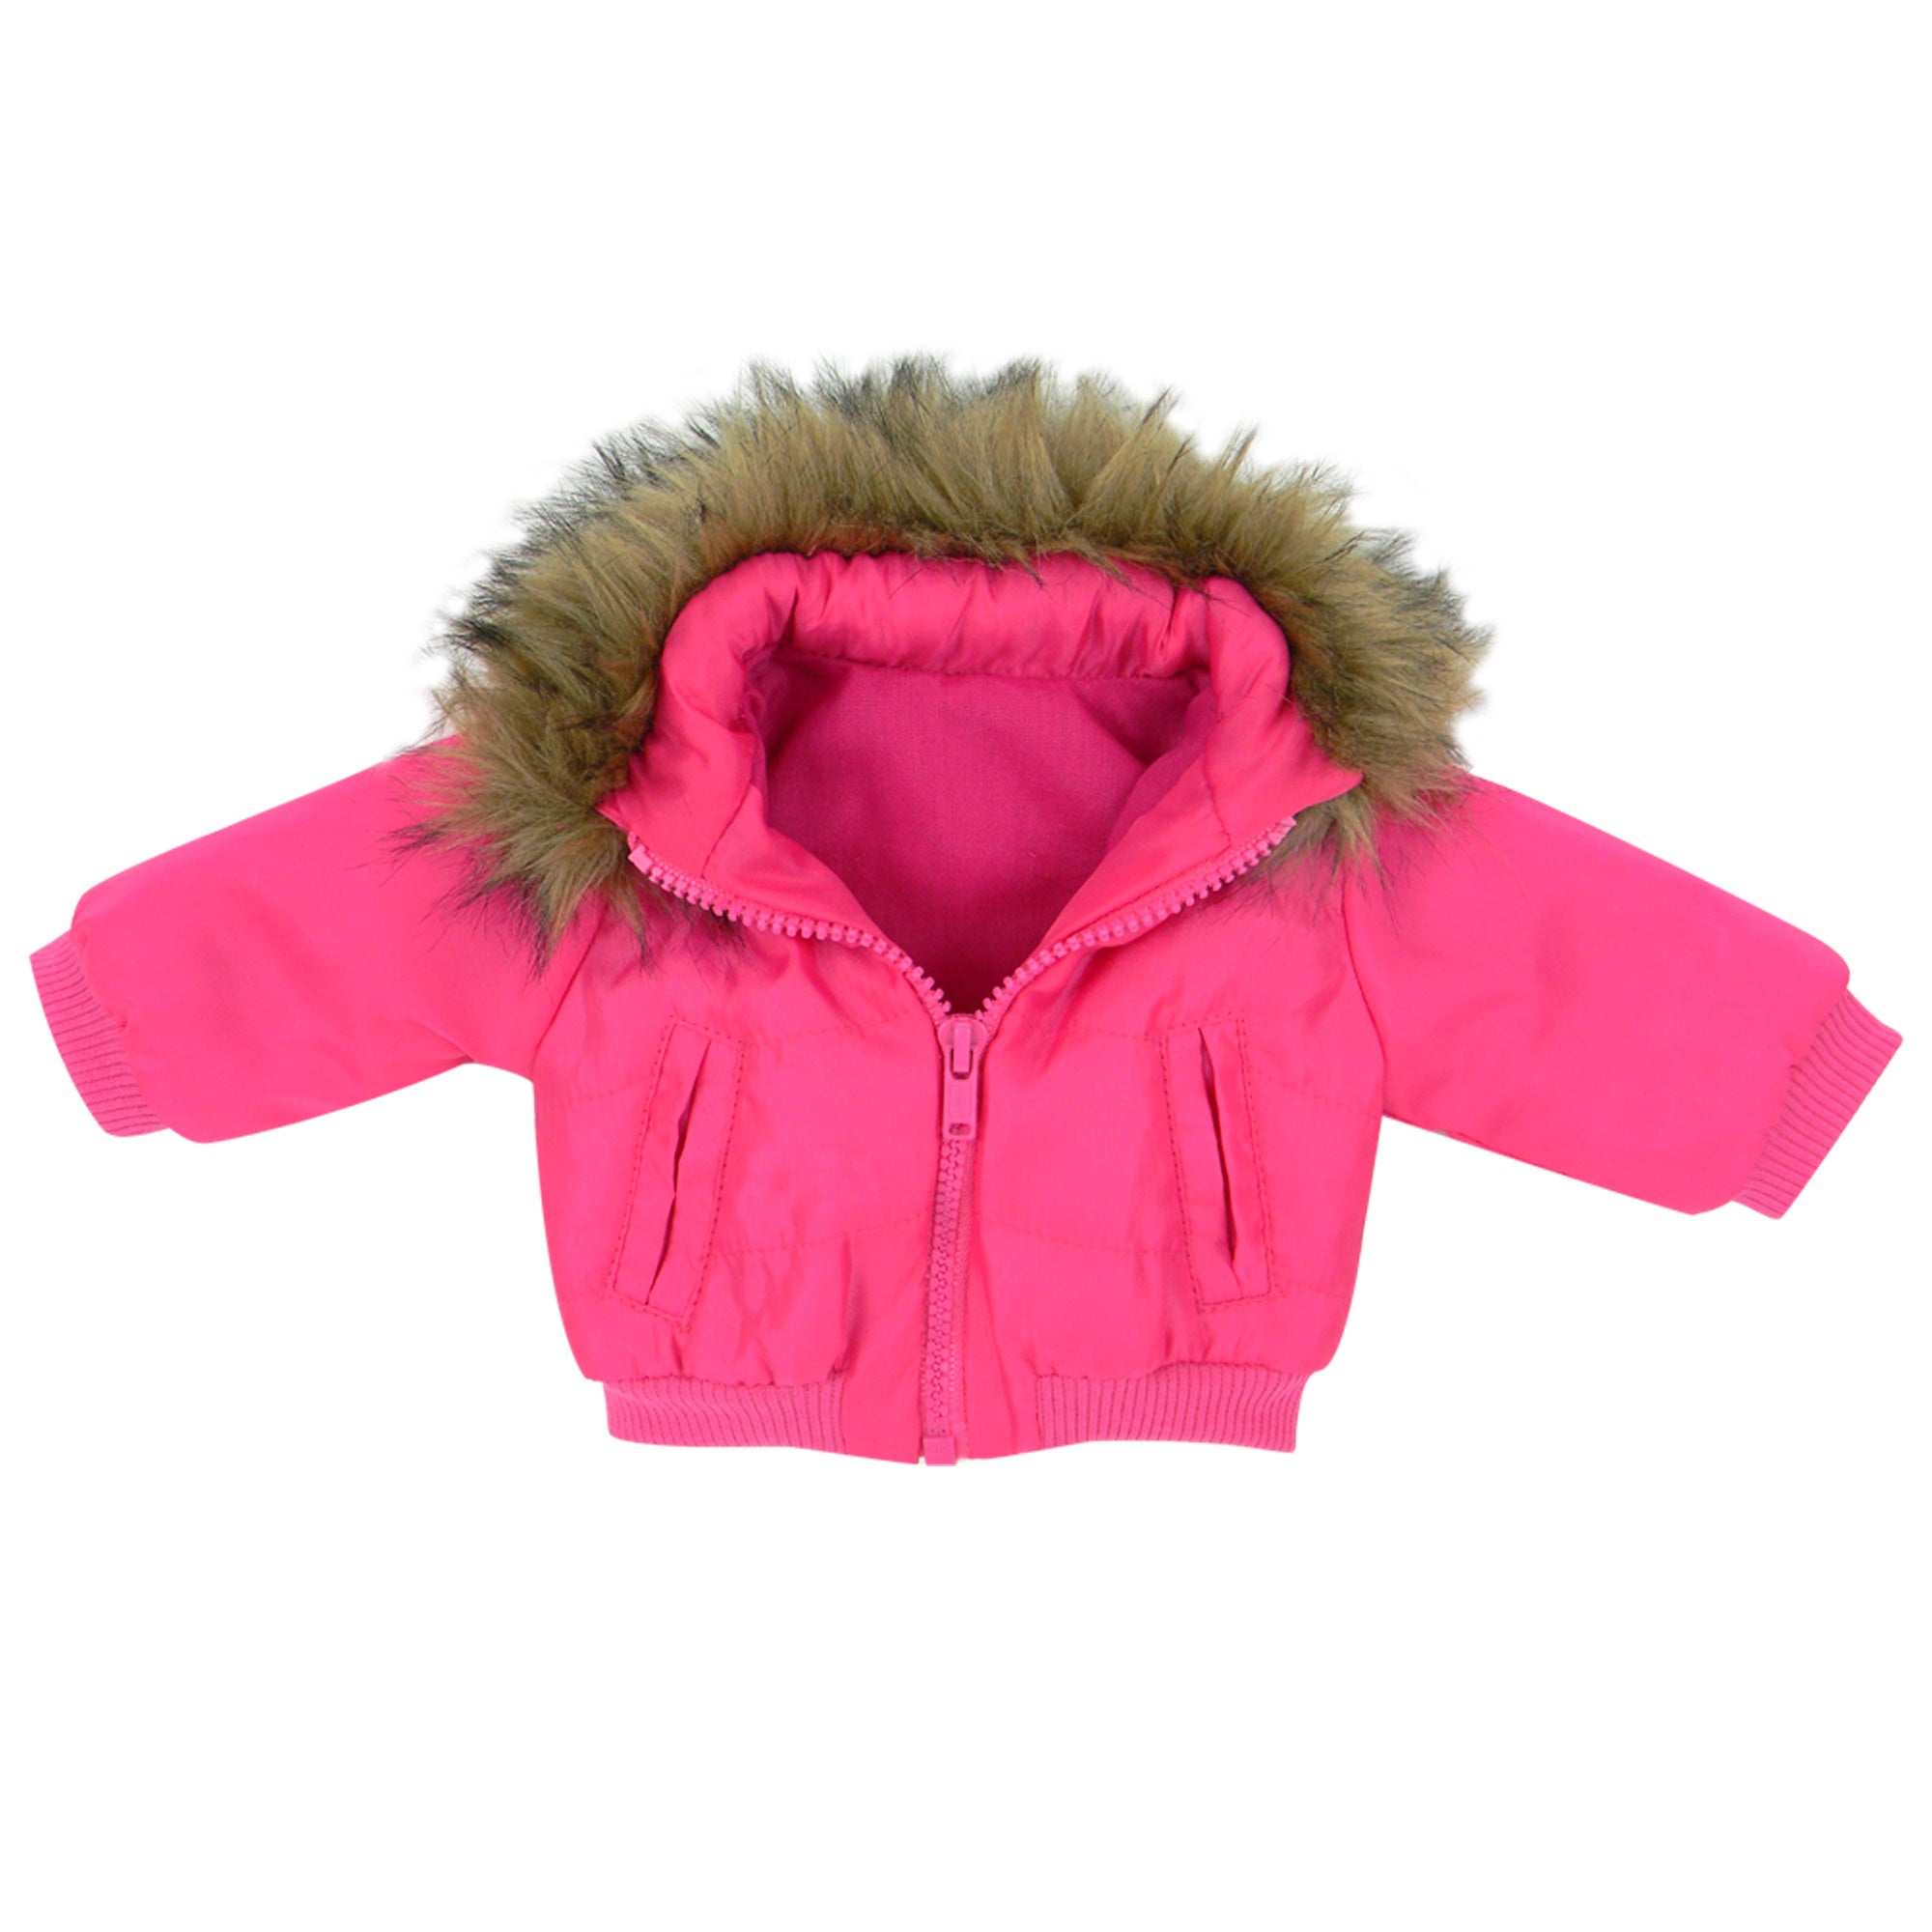 Sophia's Puffy Jacket with faux fur Trim for 18" Dolls, Hot Pink